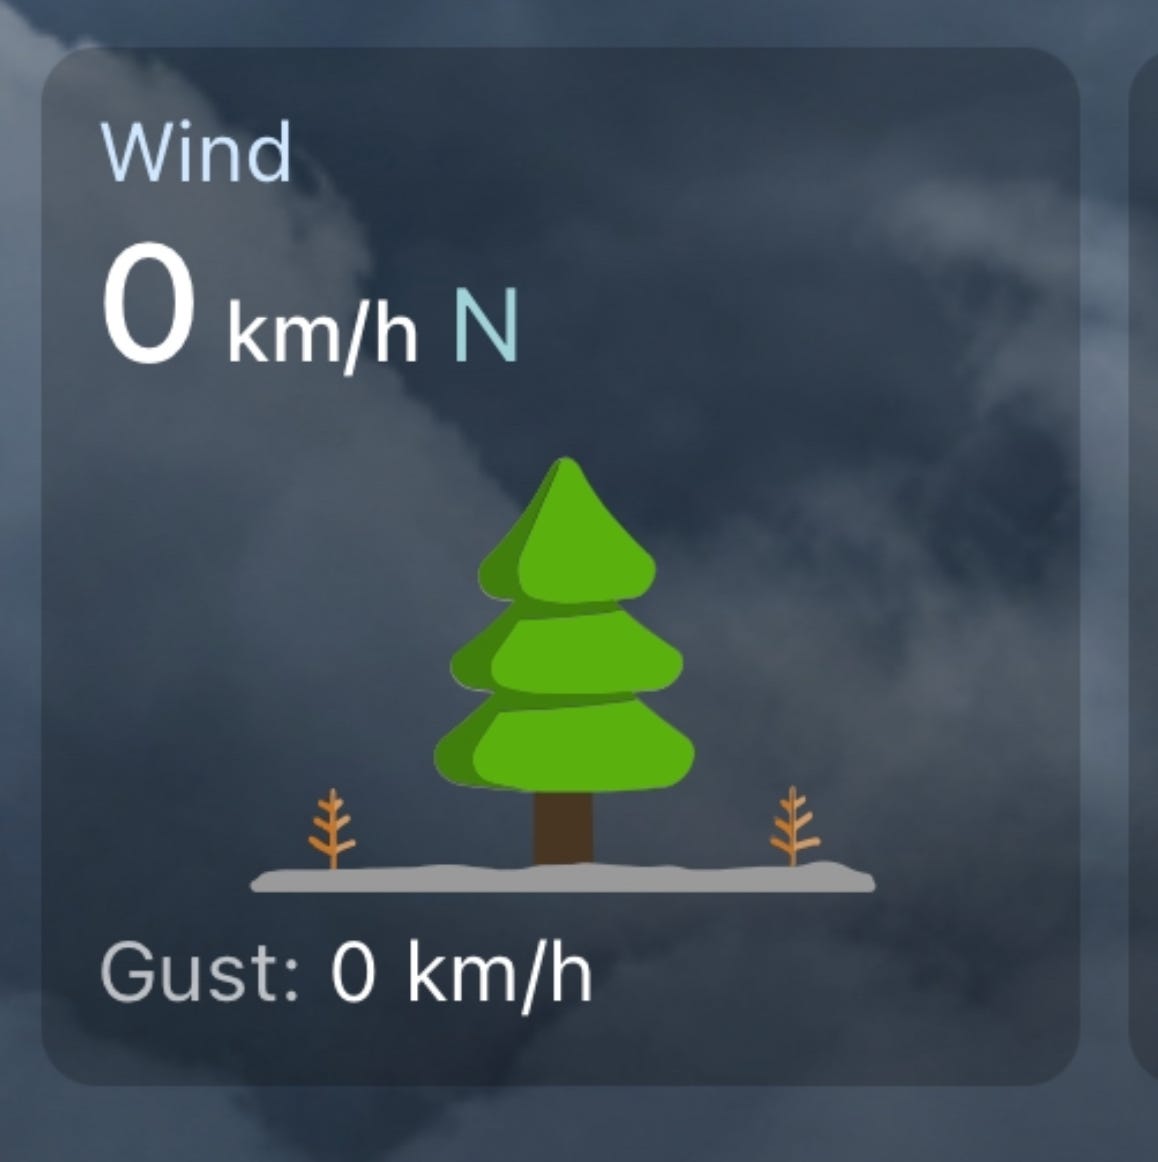 A screen grab of the weather app on my phone indicating the wind speed (and gusts) was 0 kilometres per hour